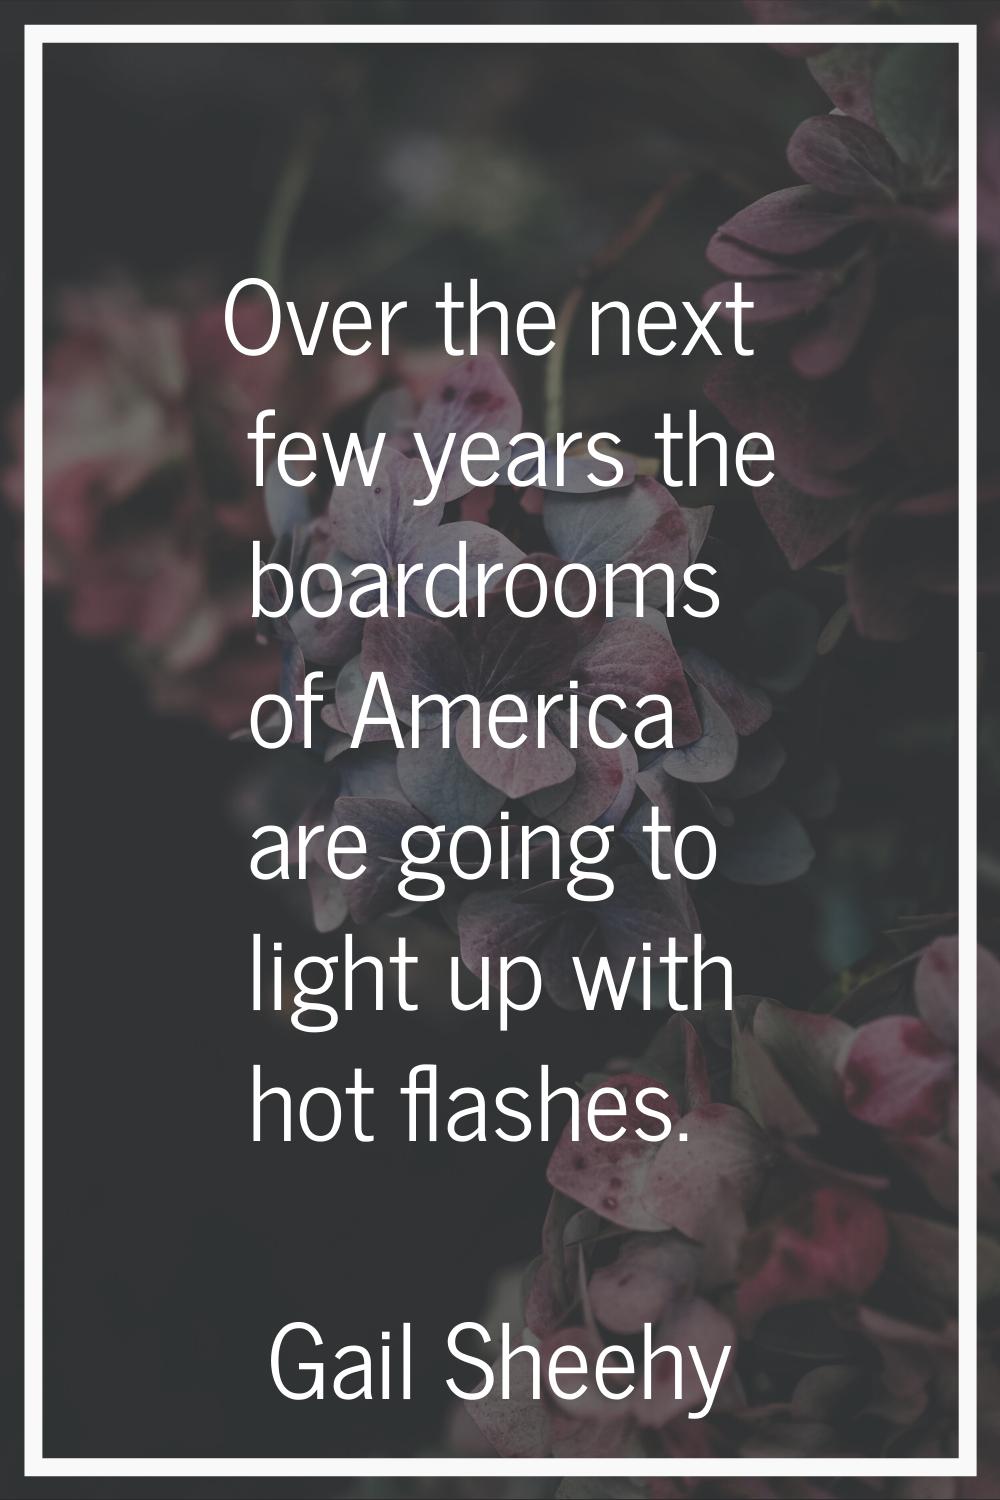 Over the next few years the boardrooms of America are going to light up with hot flashes.